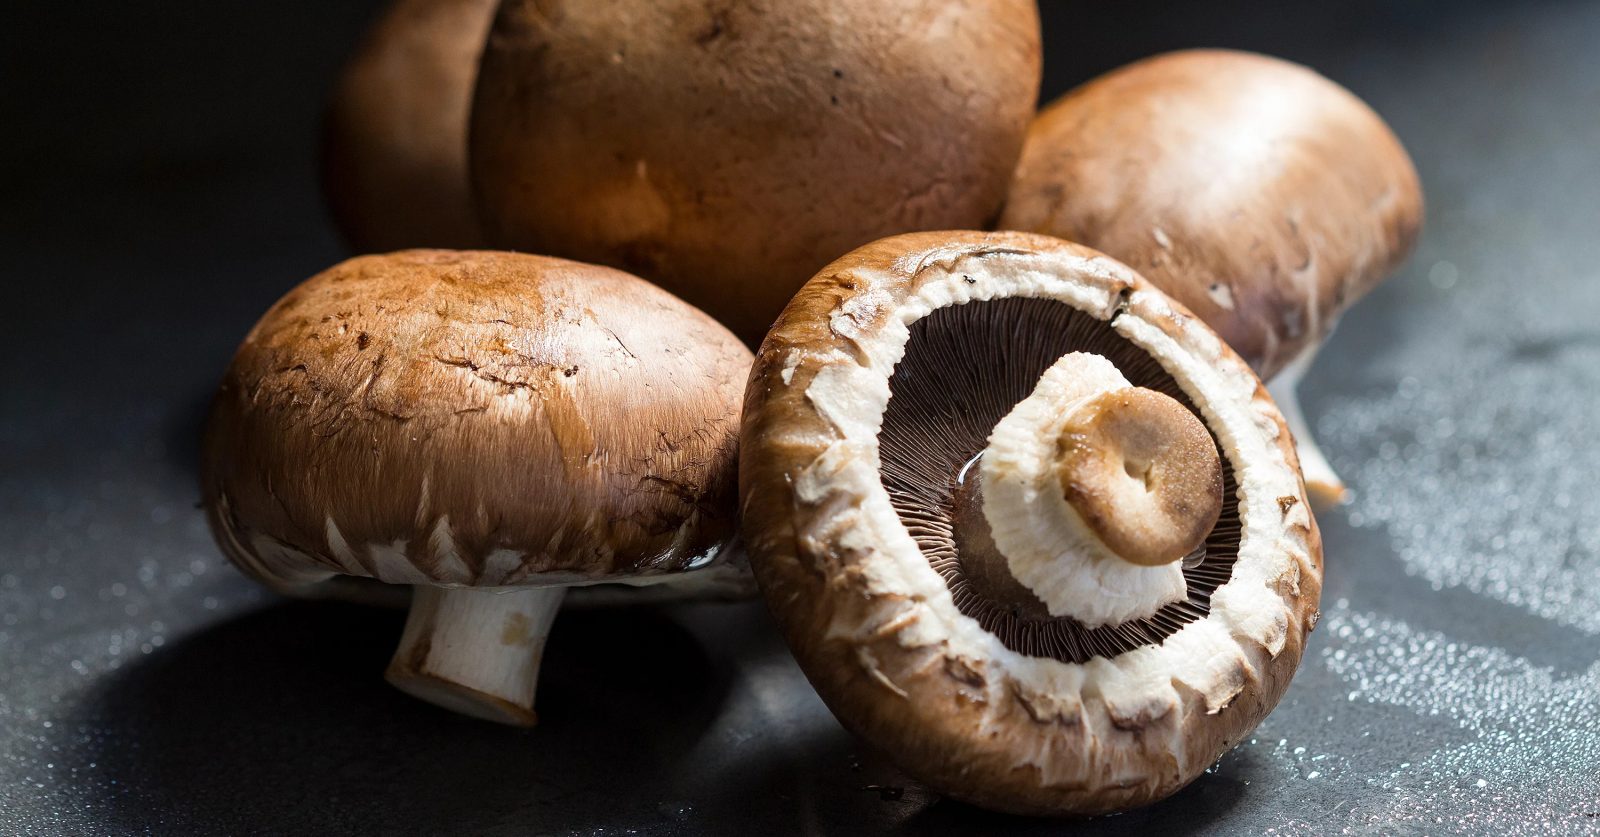 Does Your Real Age Match Your Taste Buds’ Age? Pick a Food for Each of These 16 Ingredients to Find Out Mushrooms